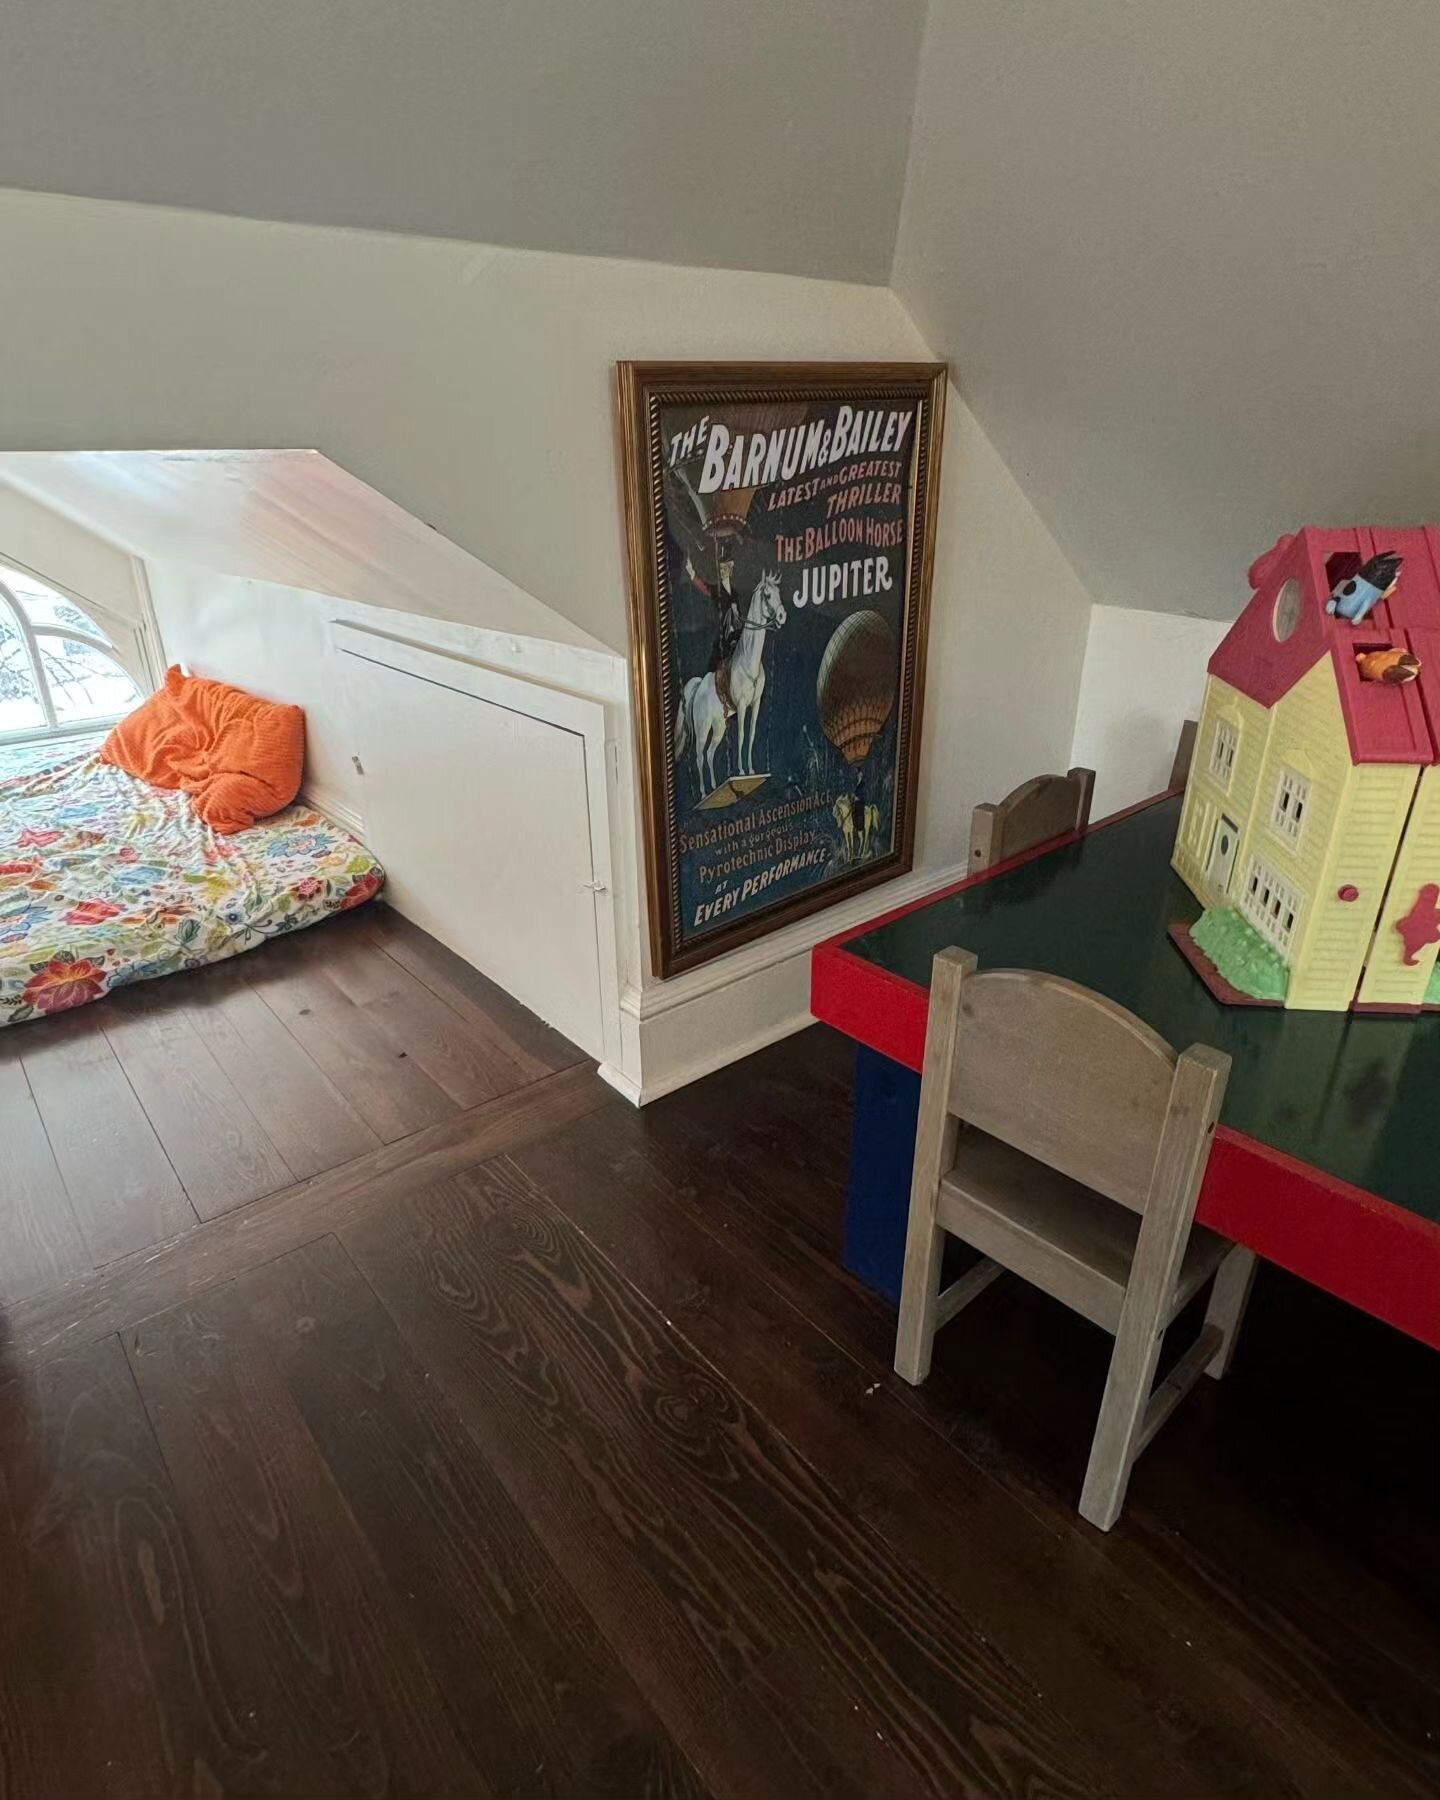 I dropped the ball on some of the before pictures, but this loft playroom was such a neat space to work in but also had some challenges - working with lower ceilings and slanted walls makes storage options more limited.

Having an organized play area